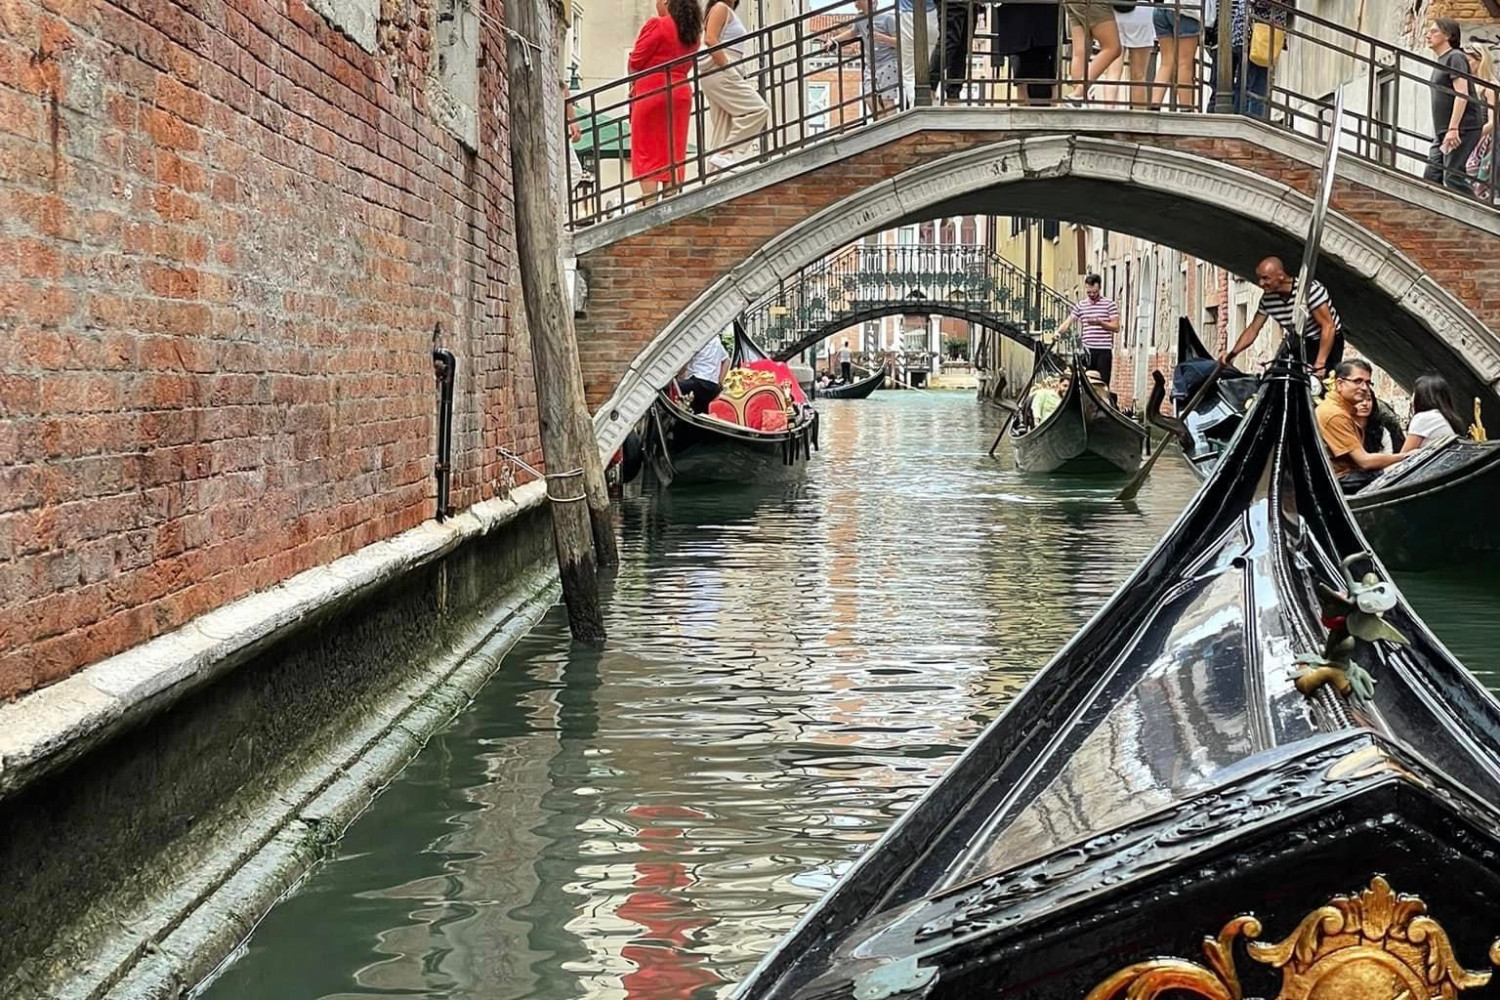 A gondola ride on the Grand Canal in Venice, Italy.